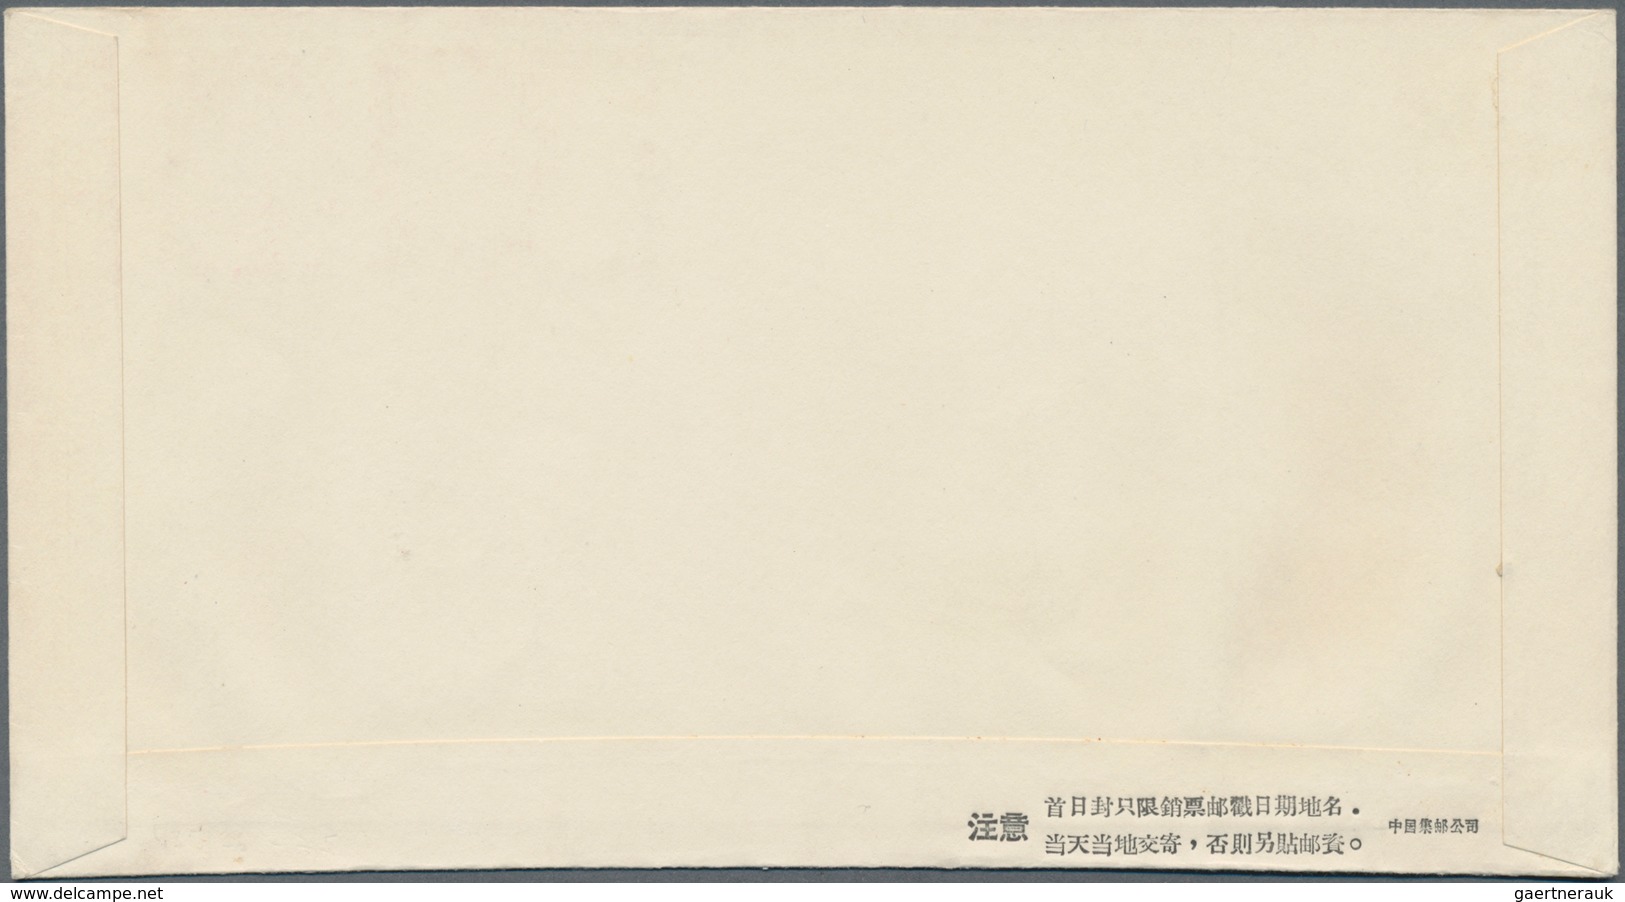 China - Volksrepublik: 1959, 6 First Day covers of C58, C59, C60, C61, S31 and S34, bearing the full